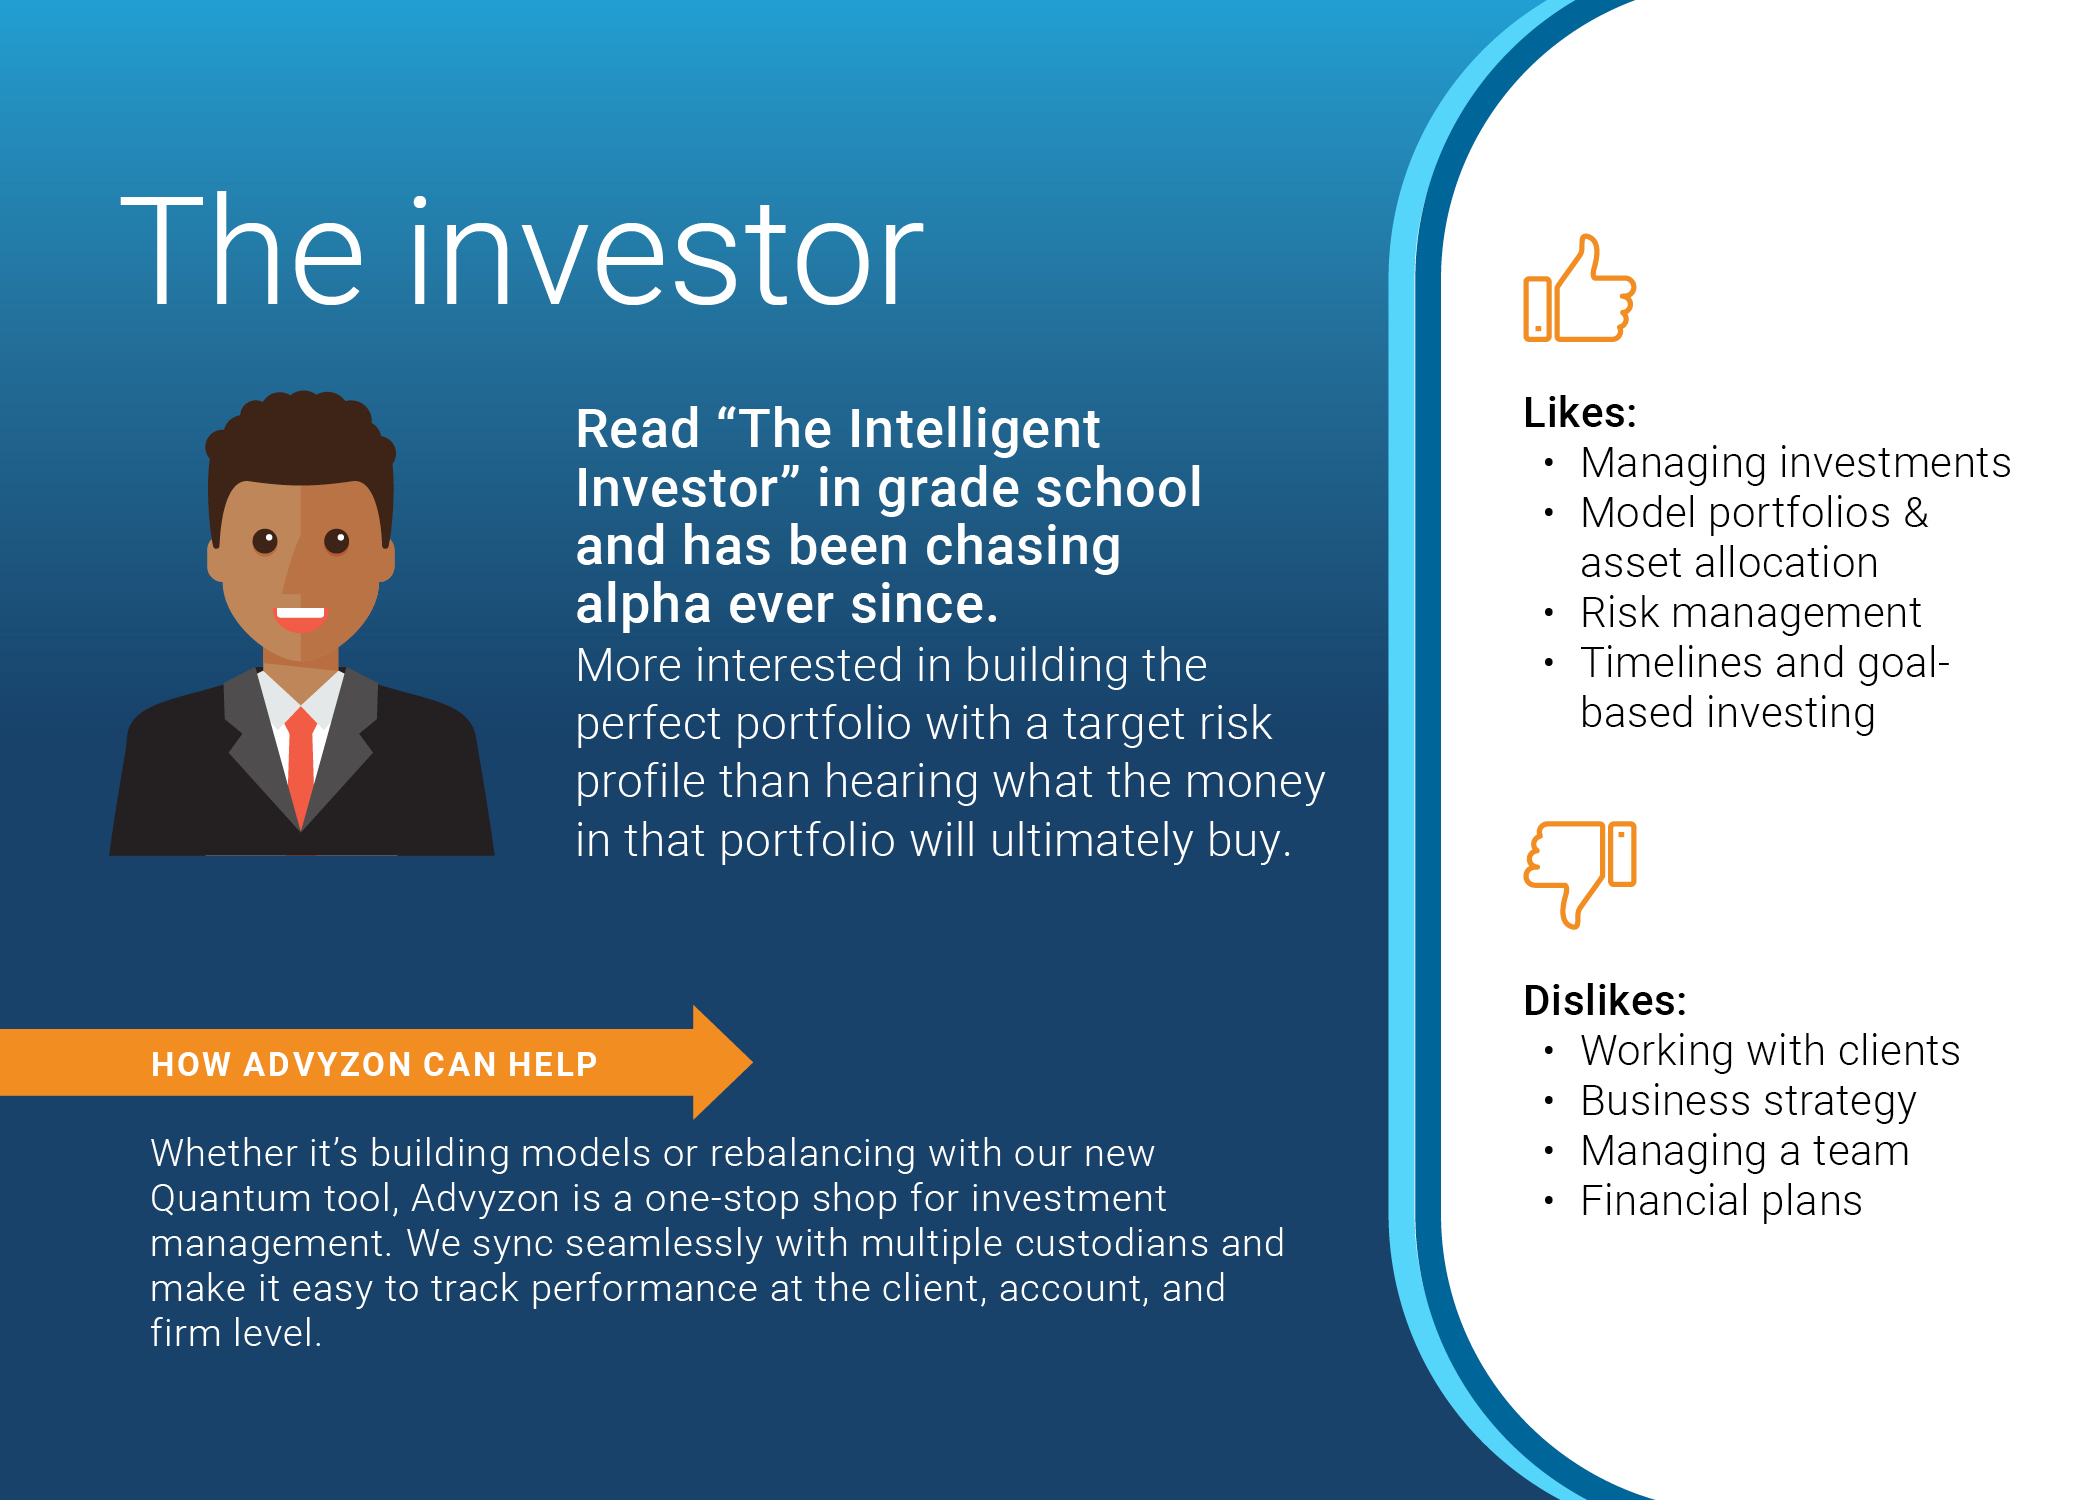 The investor
Read “The Intelligent Investor” in grade school and has been chasing alpha ever since. More interested in building the perfect portfolio with a target risk profile than hearing what the money in that portfolio will ultimately buy.
Likes:
    • Managing investments
    • Model portfolios & asset allocation
    • Risk management
    • Timelines and goal-based investing
Dislikes:
    • Working with clients
    • Business strategy
    • Managing a team
    • Financial plans
How Advyzon can help
Whether it’s building models or rebalancing with our new Quantum tool, Advyzon is a one-stop shop for investment management. We sync seamlessly with multiple custodians and make it easy to track performance at the client, account, and firm level. 
